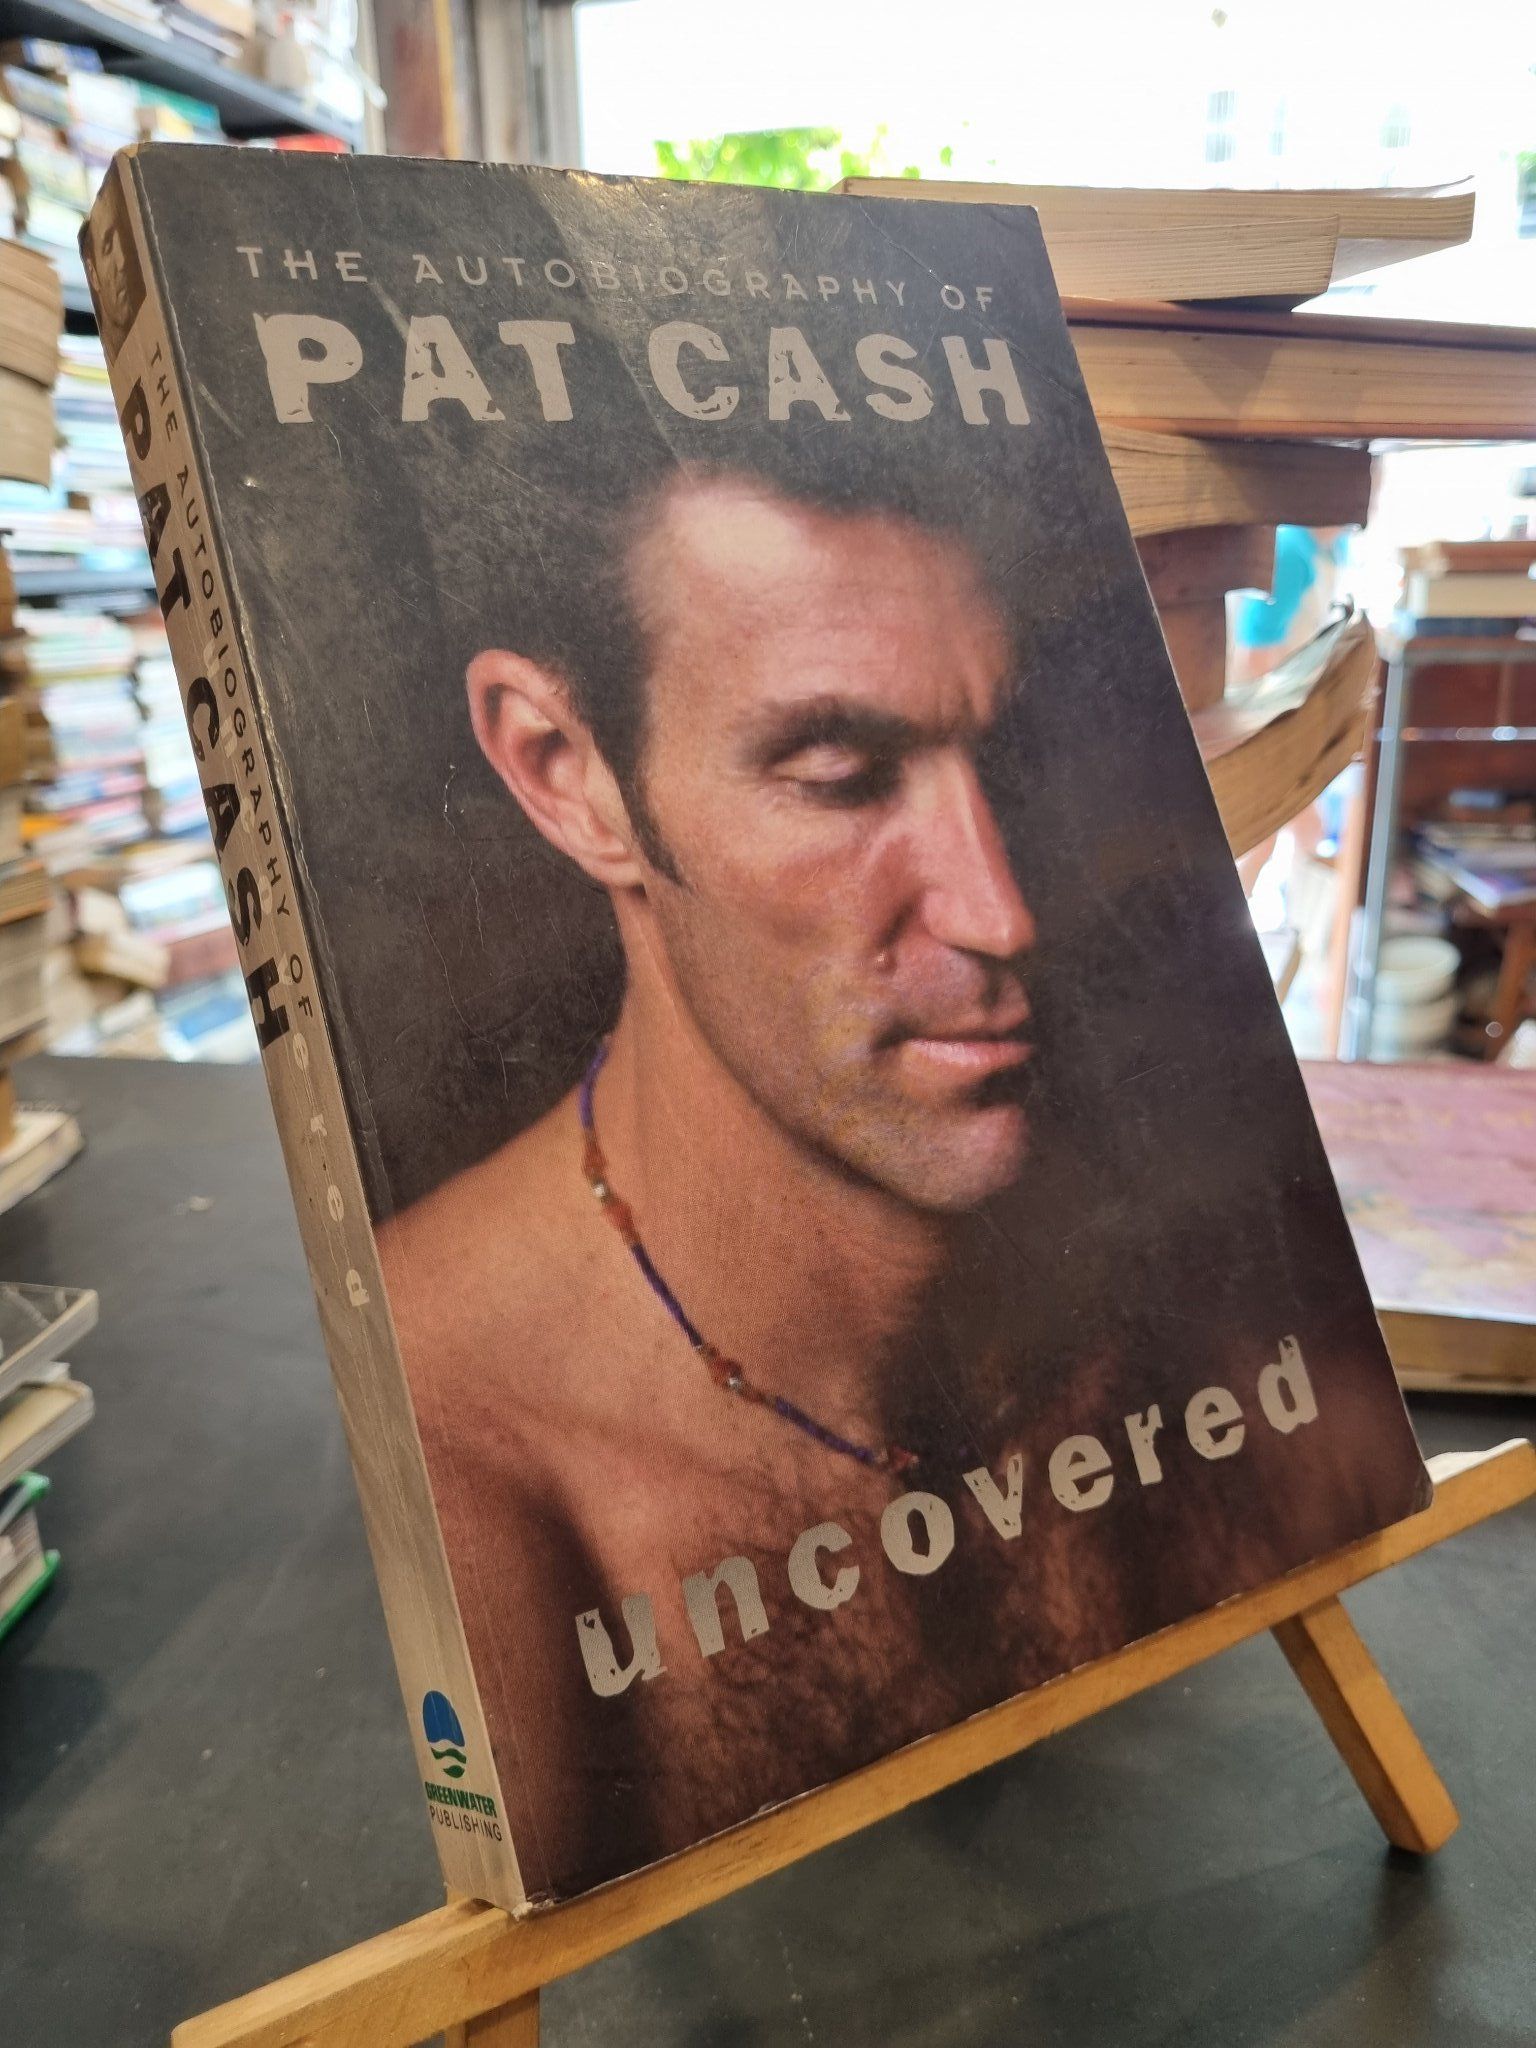  THE AUTOBIOGRAPHY OF PAT CASH : UNCOVERED 